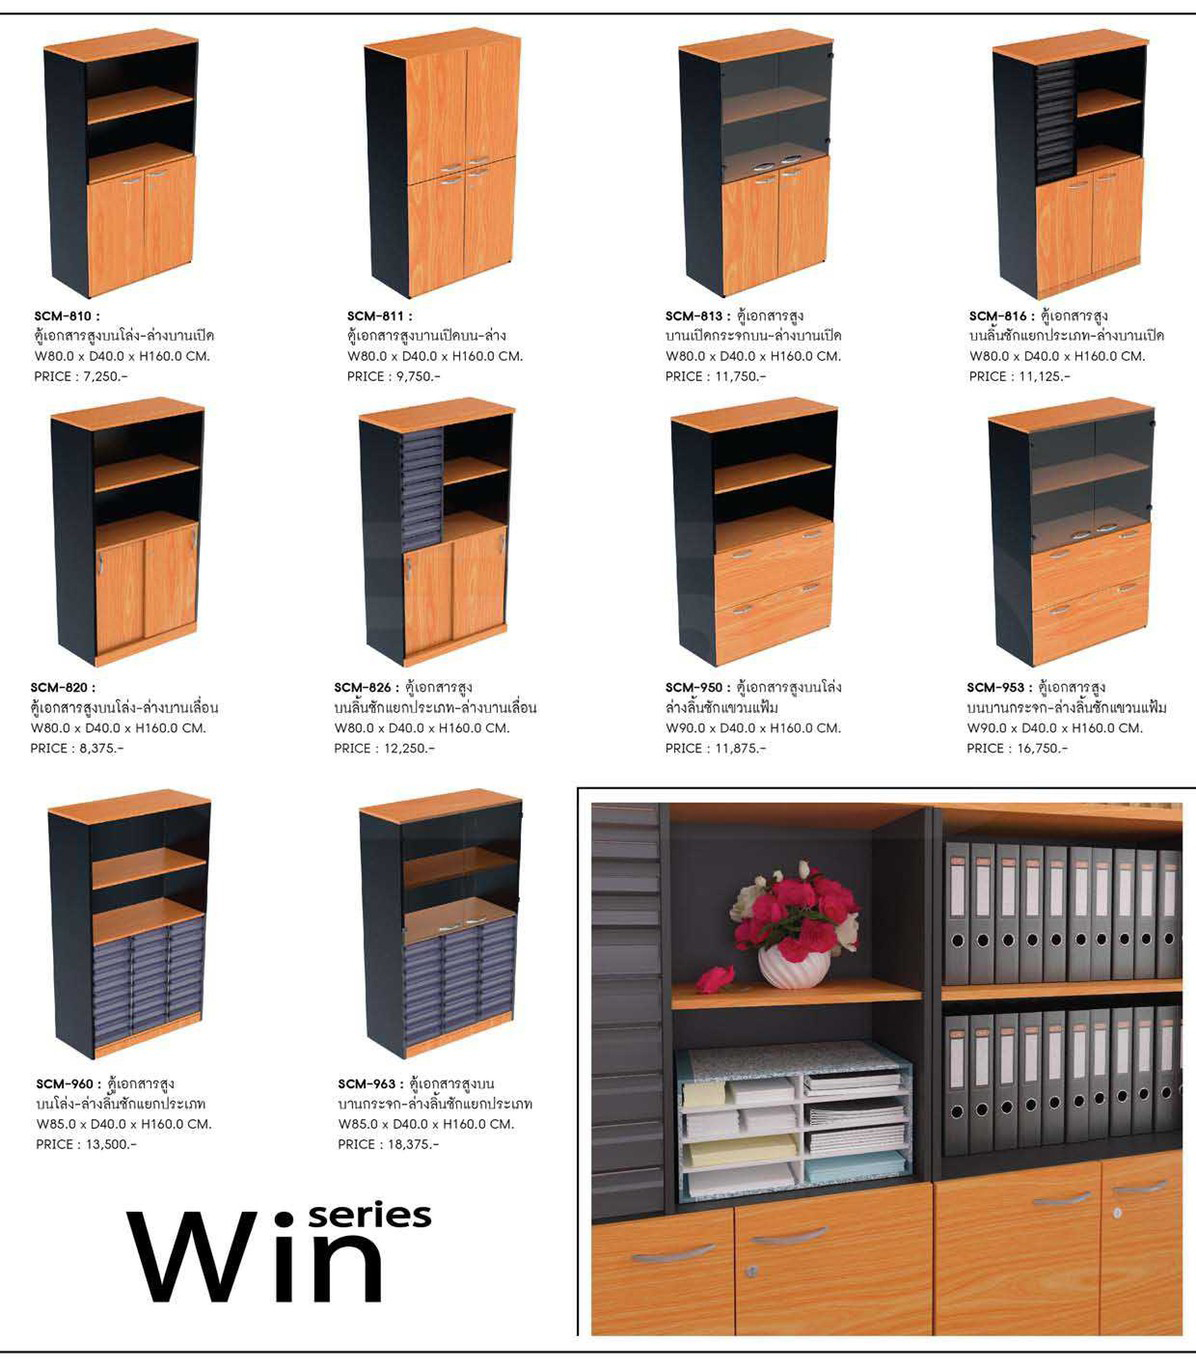 93056::SCM-816::A Sure cabinet with upper drawers and lower double swing doors. Dimension (WxDxH) cm : 80x40x160